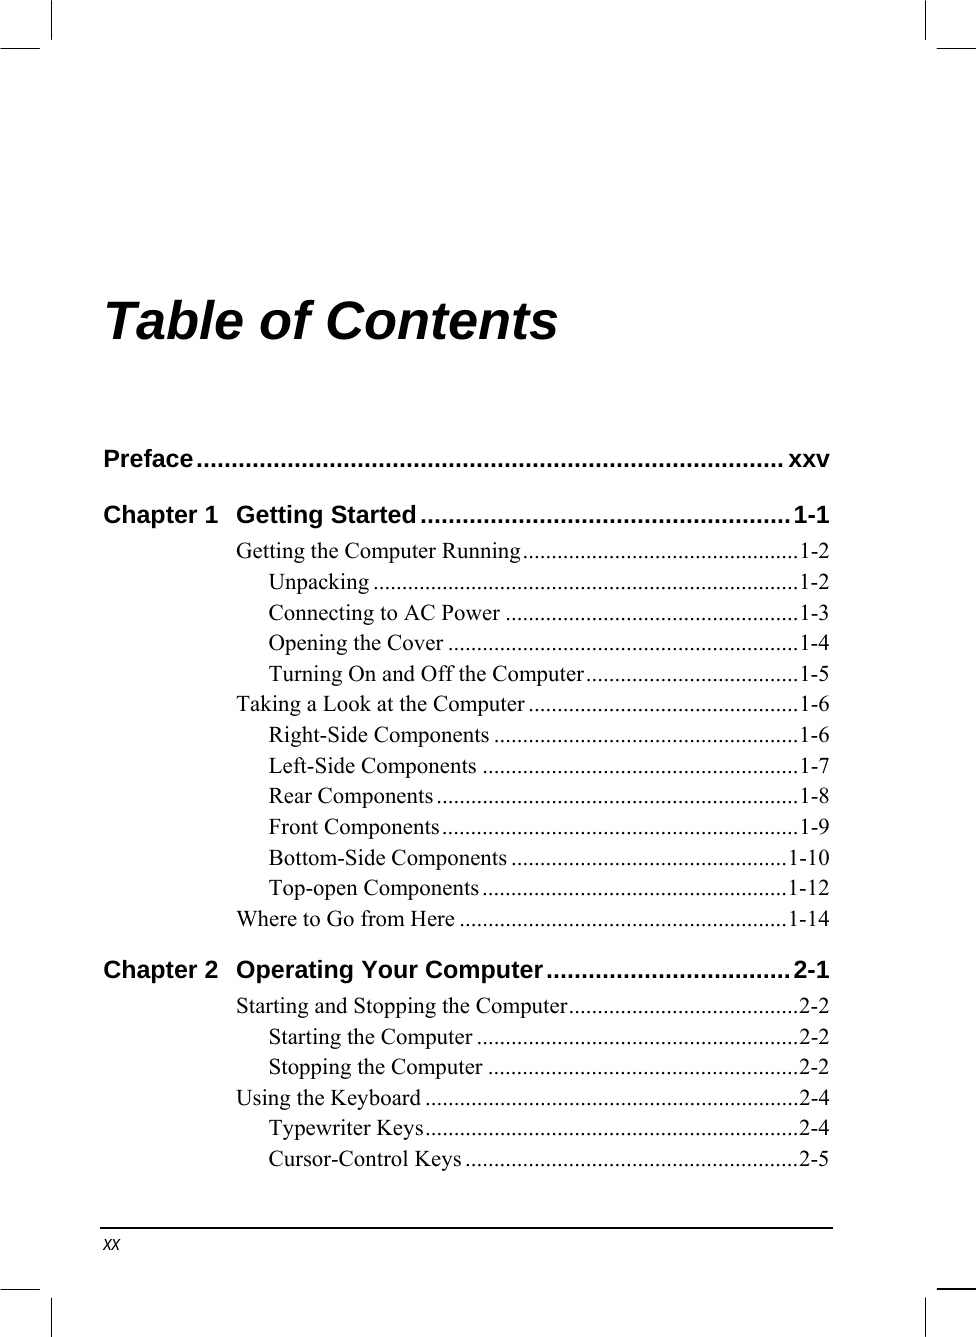  xx Table of Contents Preface....................................................................................xxv Chapter 1  Getting Started.....................................................1-1 Getting the Computer Running................................................1-2 Unpacking ..........................................................................1-2 Connecting to AC Power ...................................................1-3 Opening the Cover .............................................................1-4 Turning On and Off the Computer.....................................1-5 Taking a Look at the Computer ...............................................1-6 Right-Side Components .....................................................1-6 Left-Side Components .......................................................1-7 Rear Components ...............................................................1-8 Front Components..............................................................1-9 Bottom-Side Components ................................................1-10 Top-open Components.....................................................1-12 Where to Go from Here .........................................................1-14 Chapter 2  Operating Your Computer...................................2-1 Starting and Stopping the Computer........................................2-2 Starting the Computer ........................................................2-2 Stopping the Computer ......................................................2-2 Using the Keyboard .................................................................2-4 Typewriter Keys.................................................................2-4 Cursor-Control Keys ..........................................................2-5 